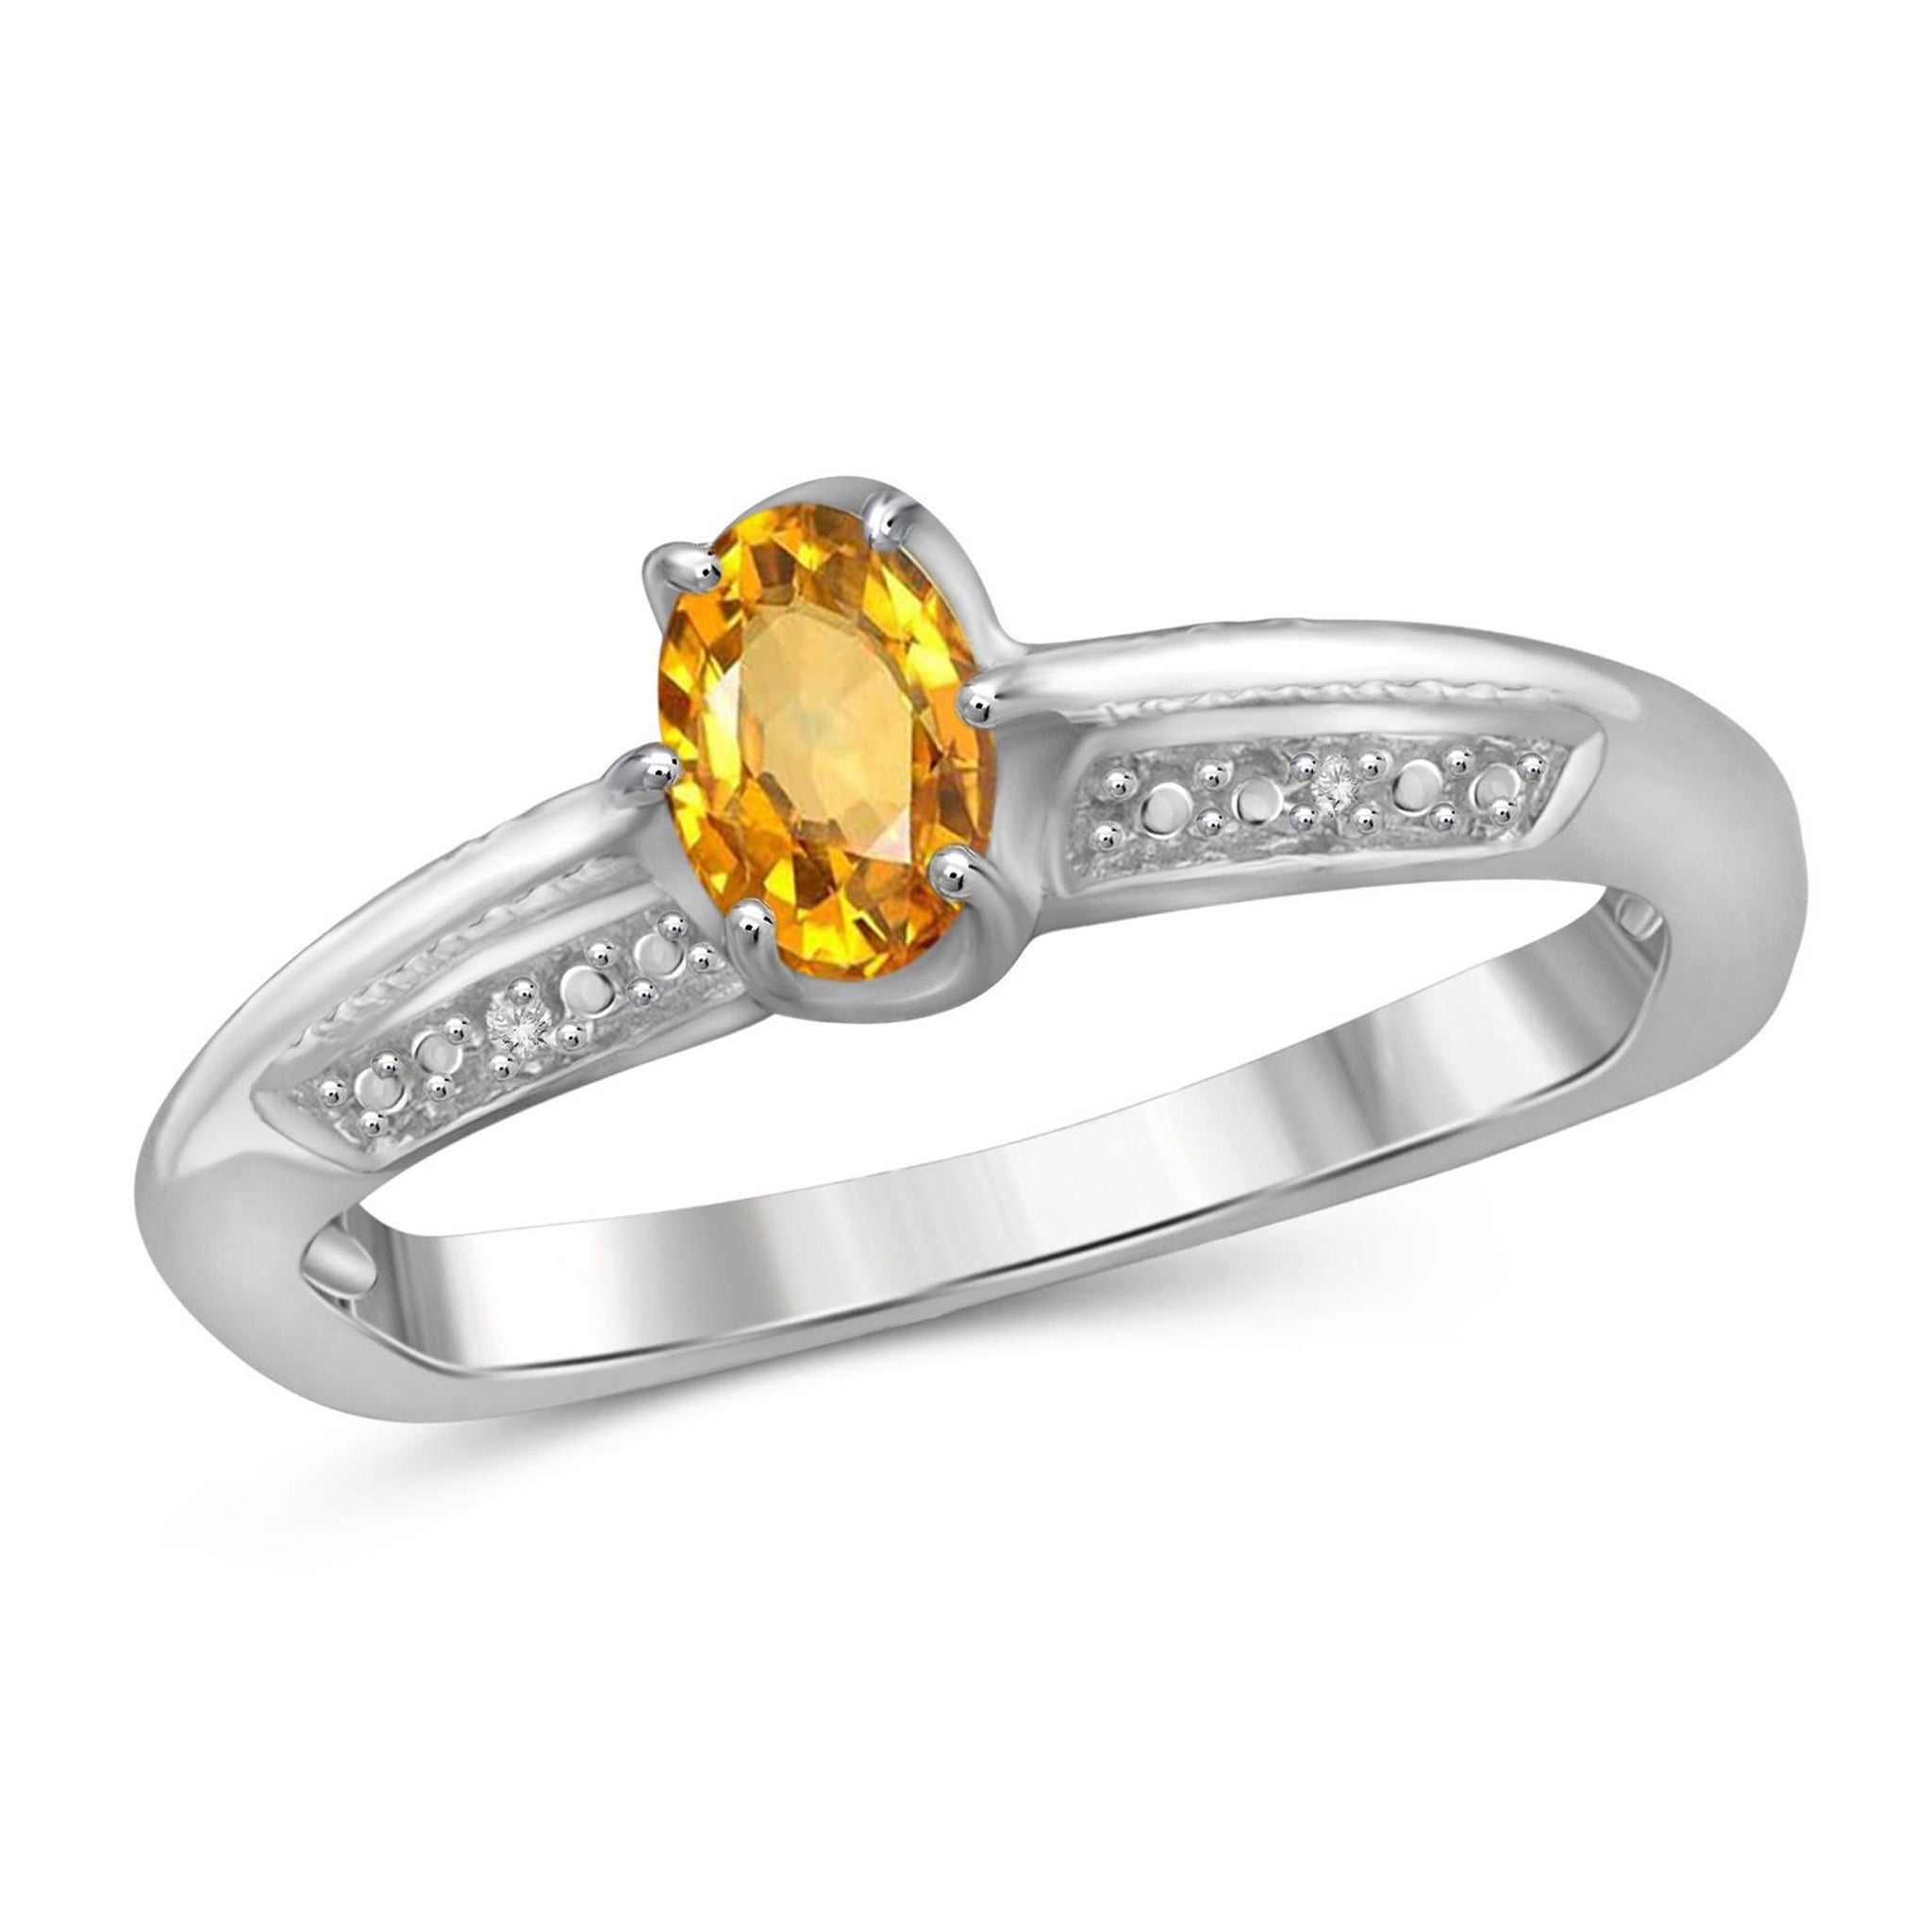 JewelonFire 1/2 Carat T.G.W. Citrine And White Diamond Accent Sterling Silver Ring - Assorting Colors